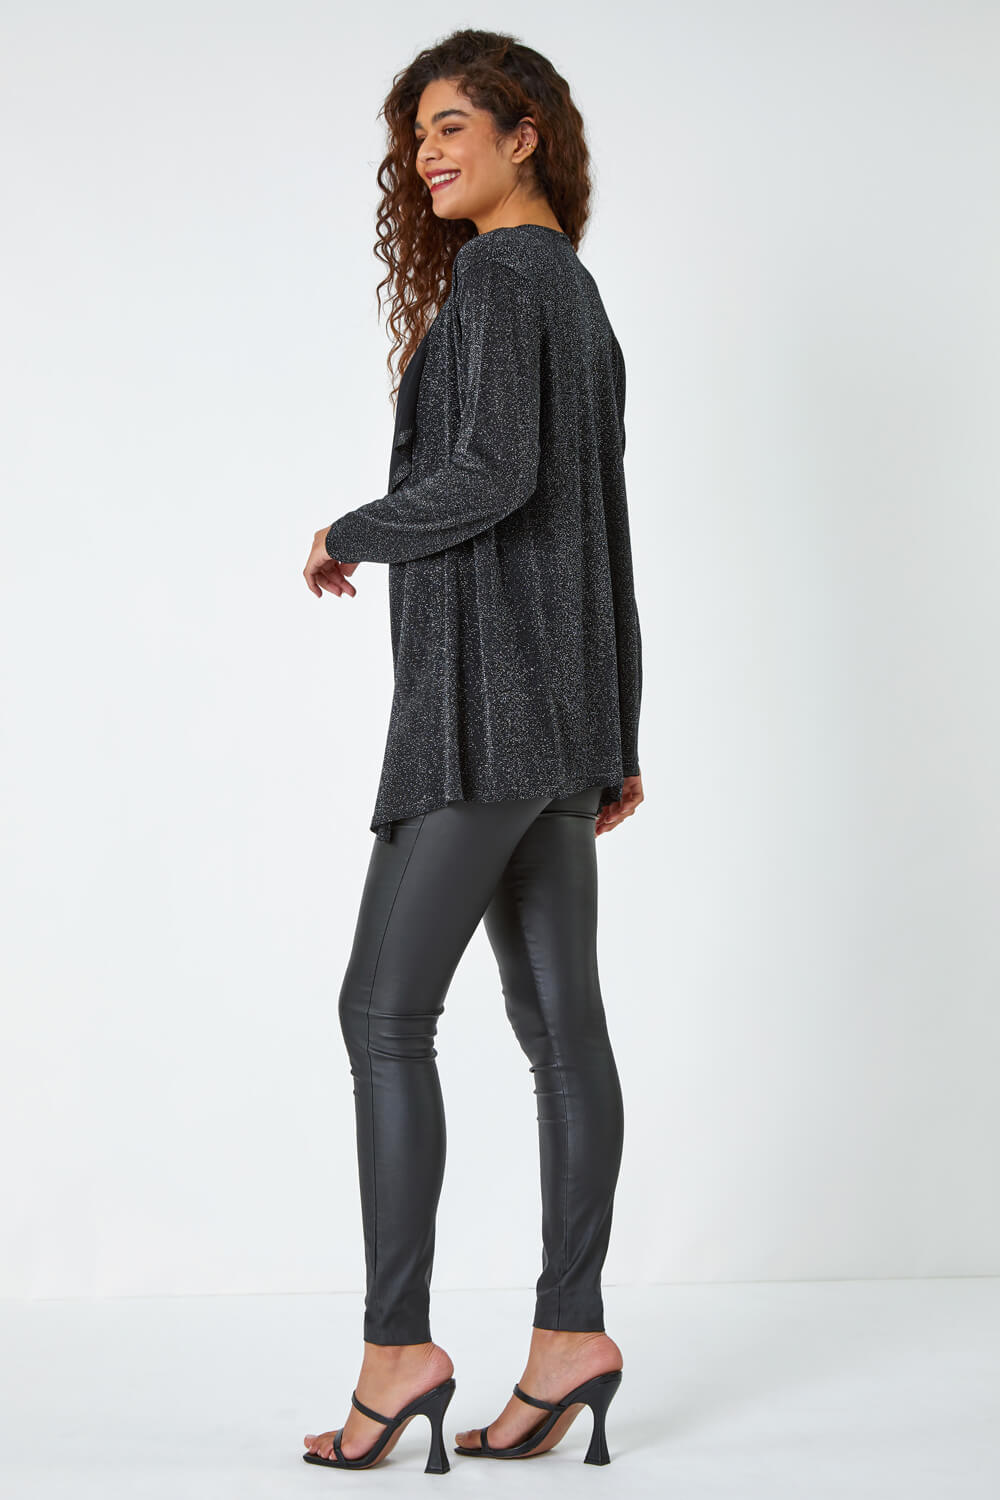 Black Shimmer Waterfall Stretch Cardigan, Image 3 of 5